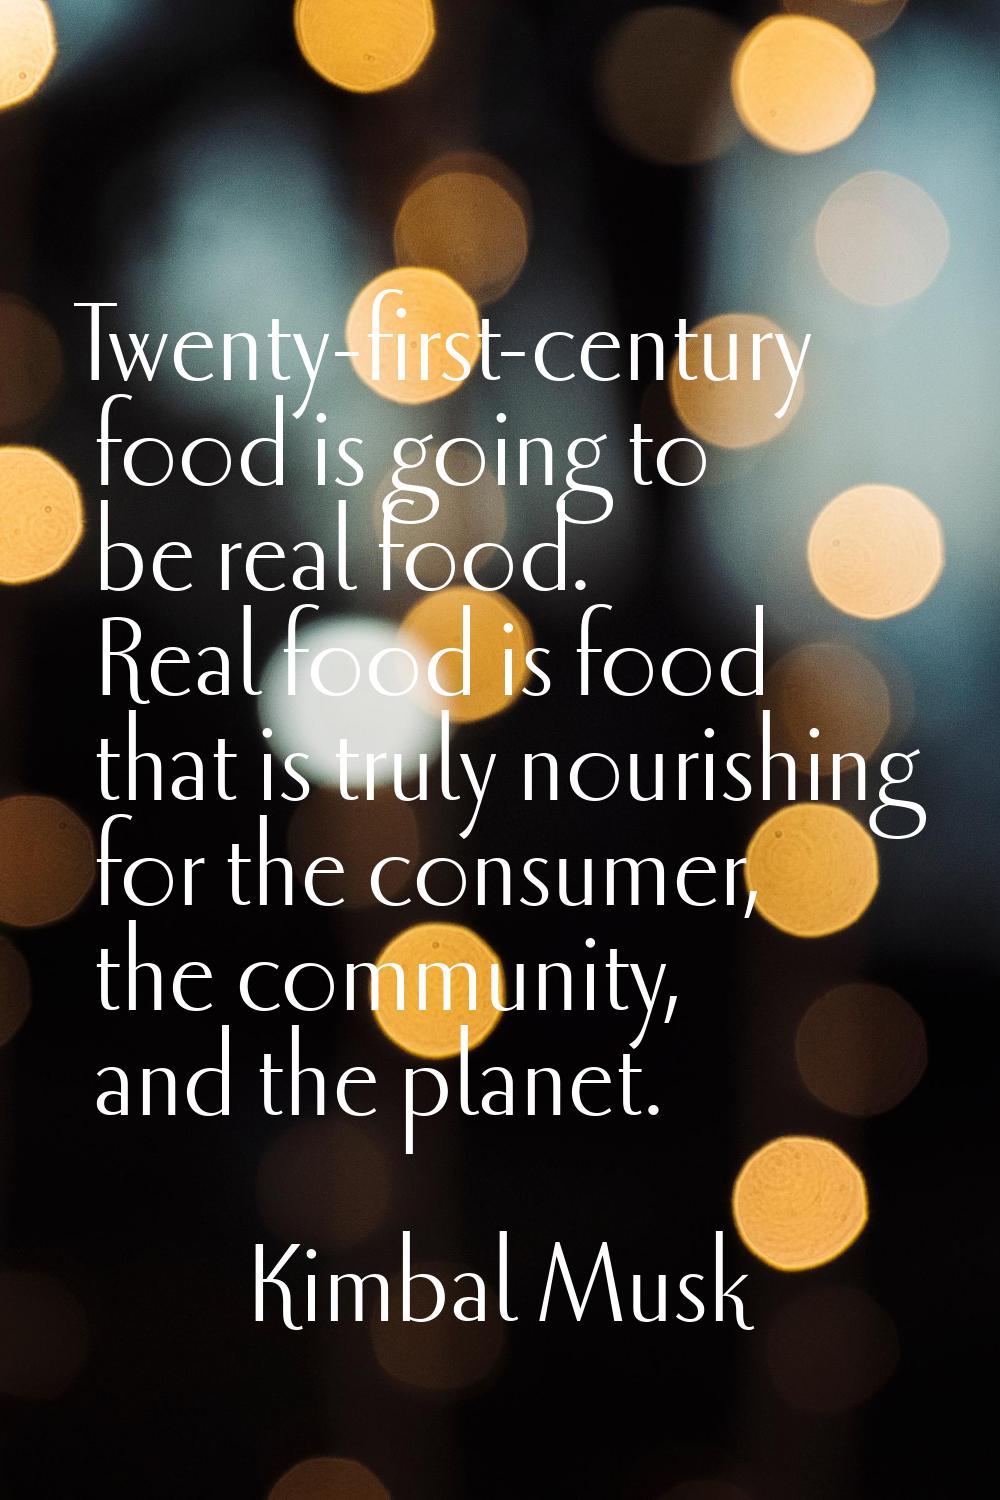 Twenty-first-century food is going to be real food. Real food is food that is truly nourishing for 